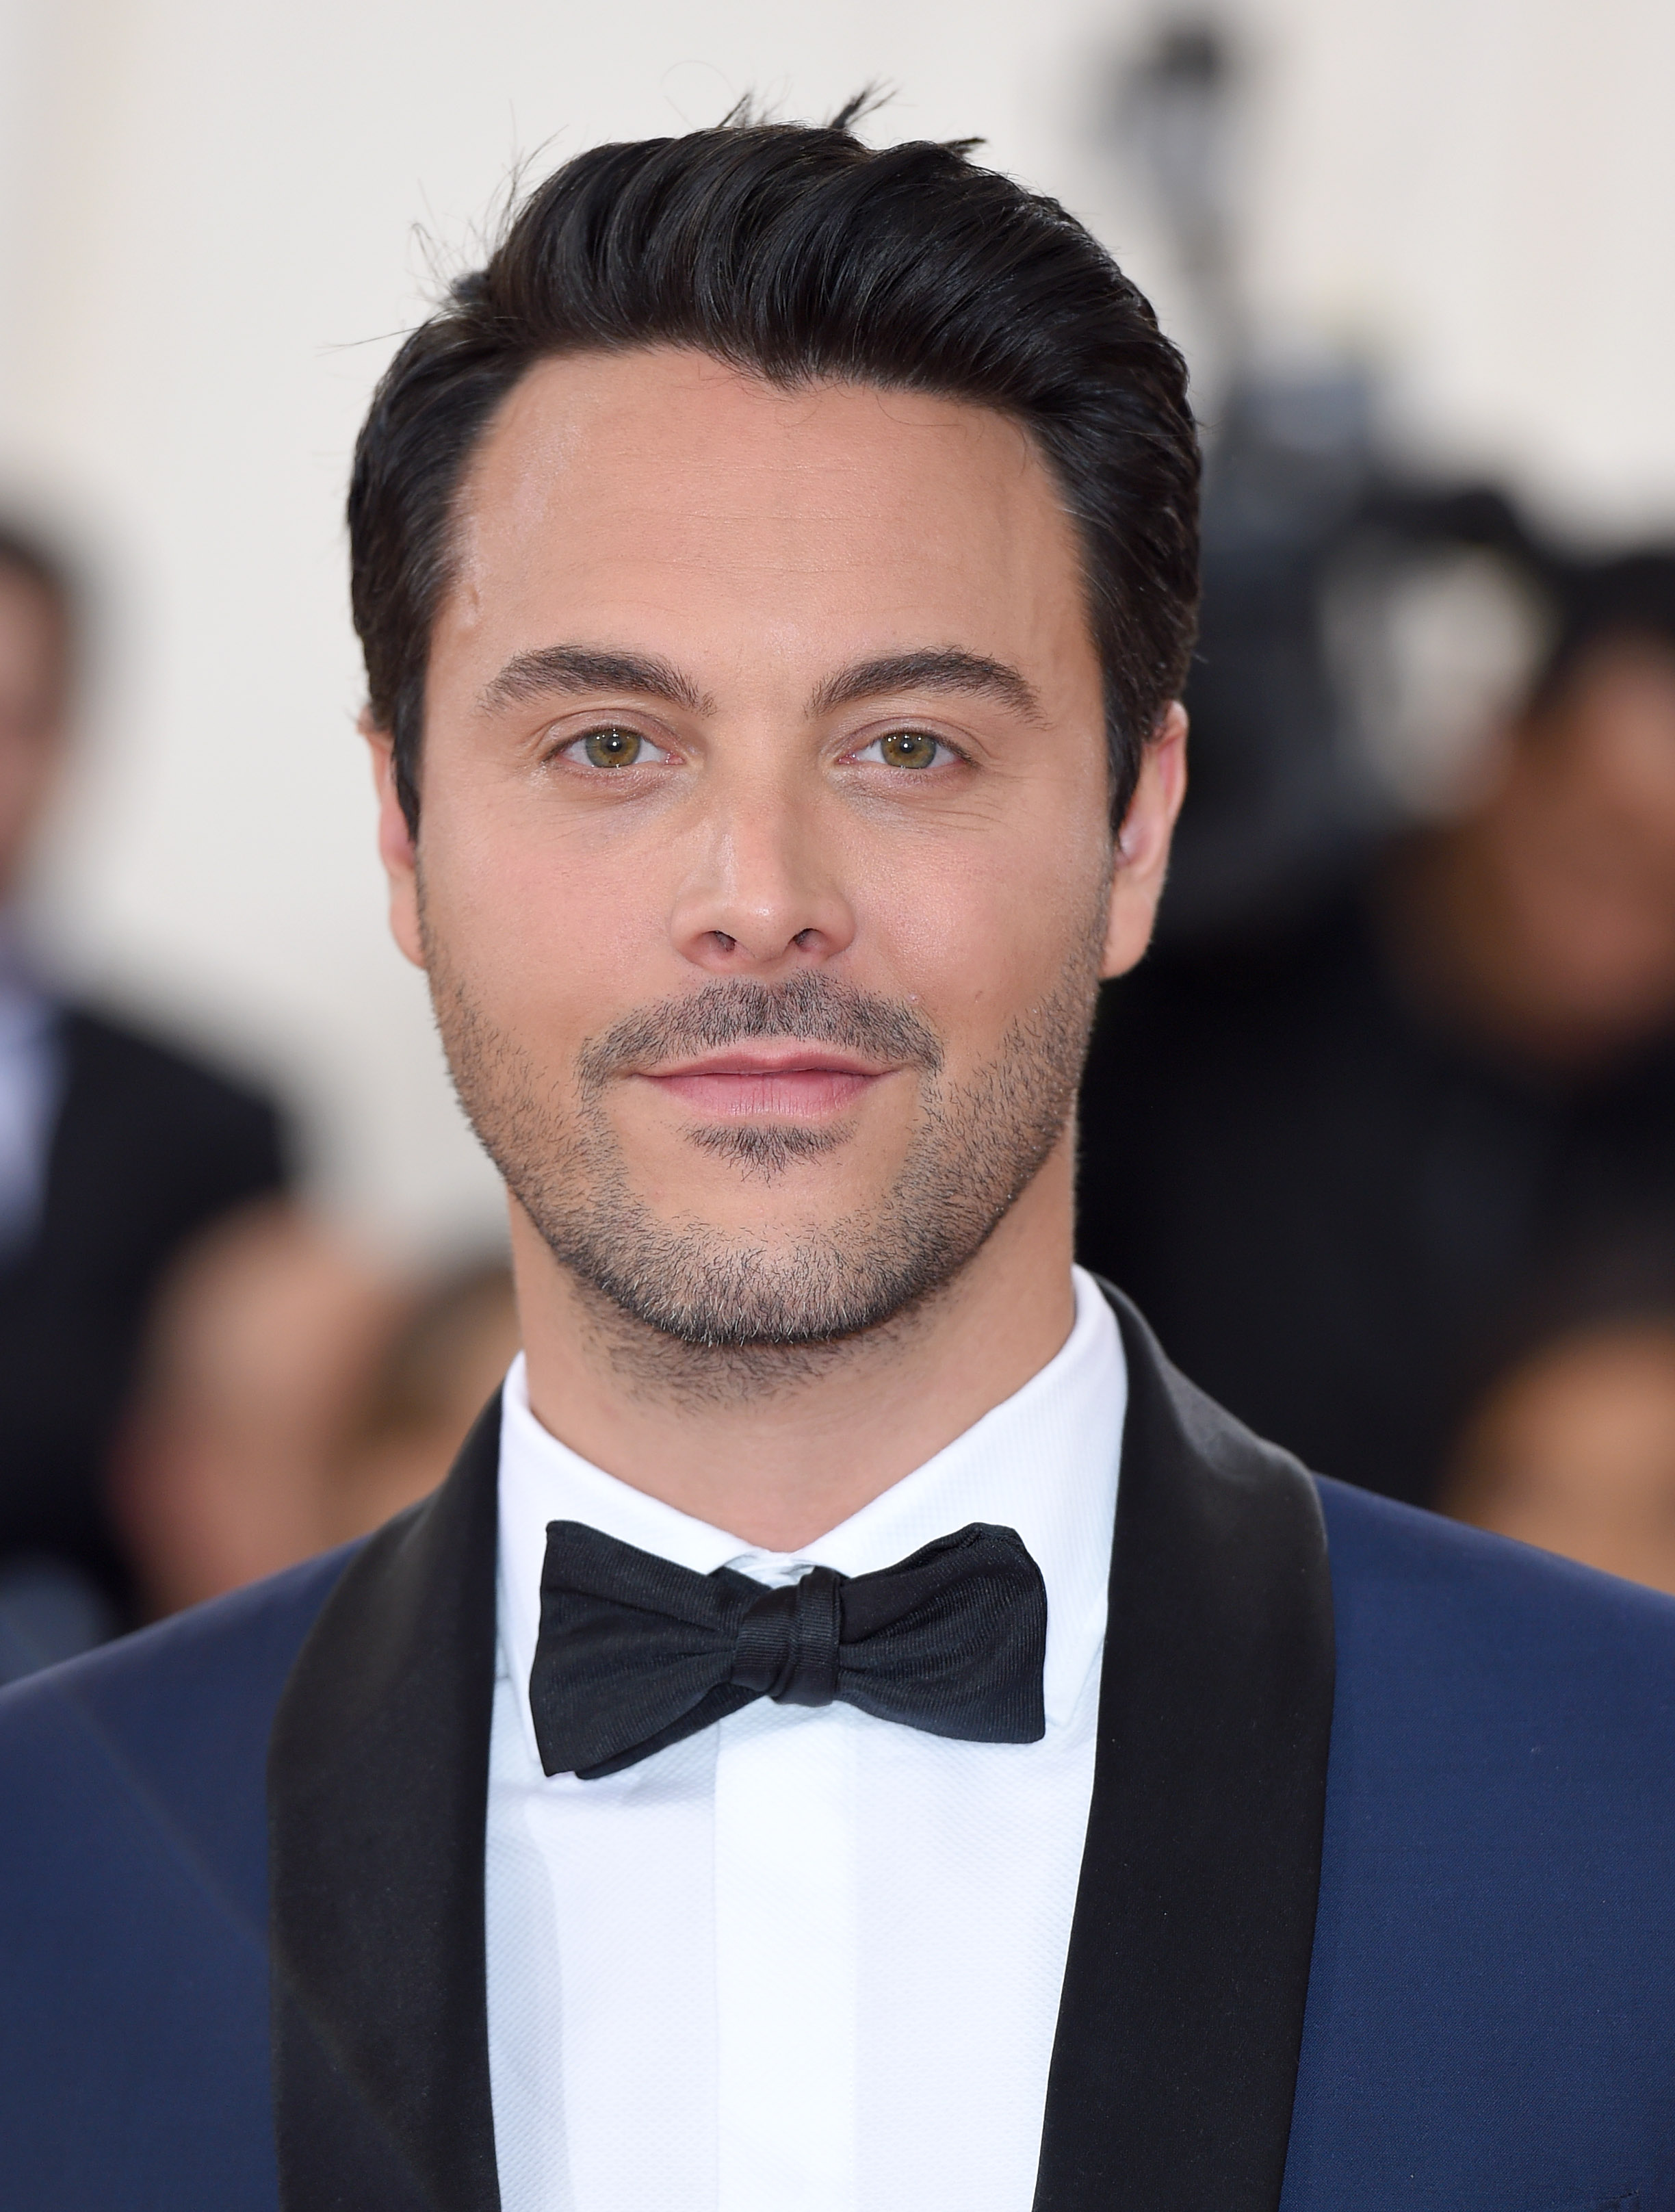 Jack Huston arrives for the Costume Institute Gala at Metropolitan Museum of Art on May 2, 2016 in New York City. (Karwai Tang—WireImage/Getty Images)